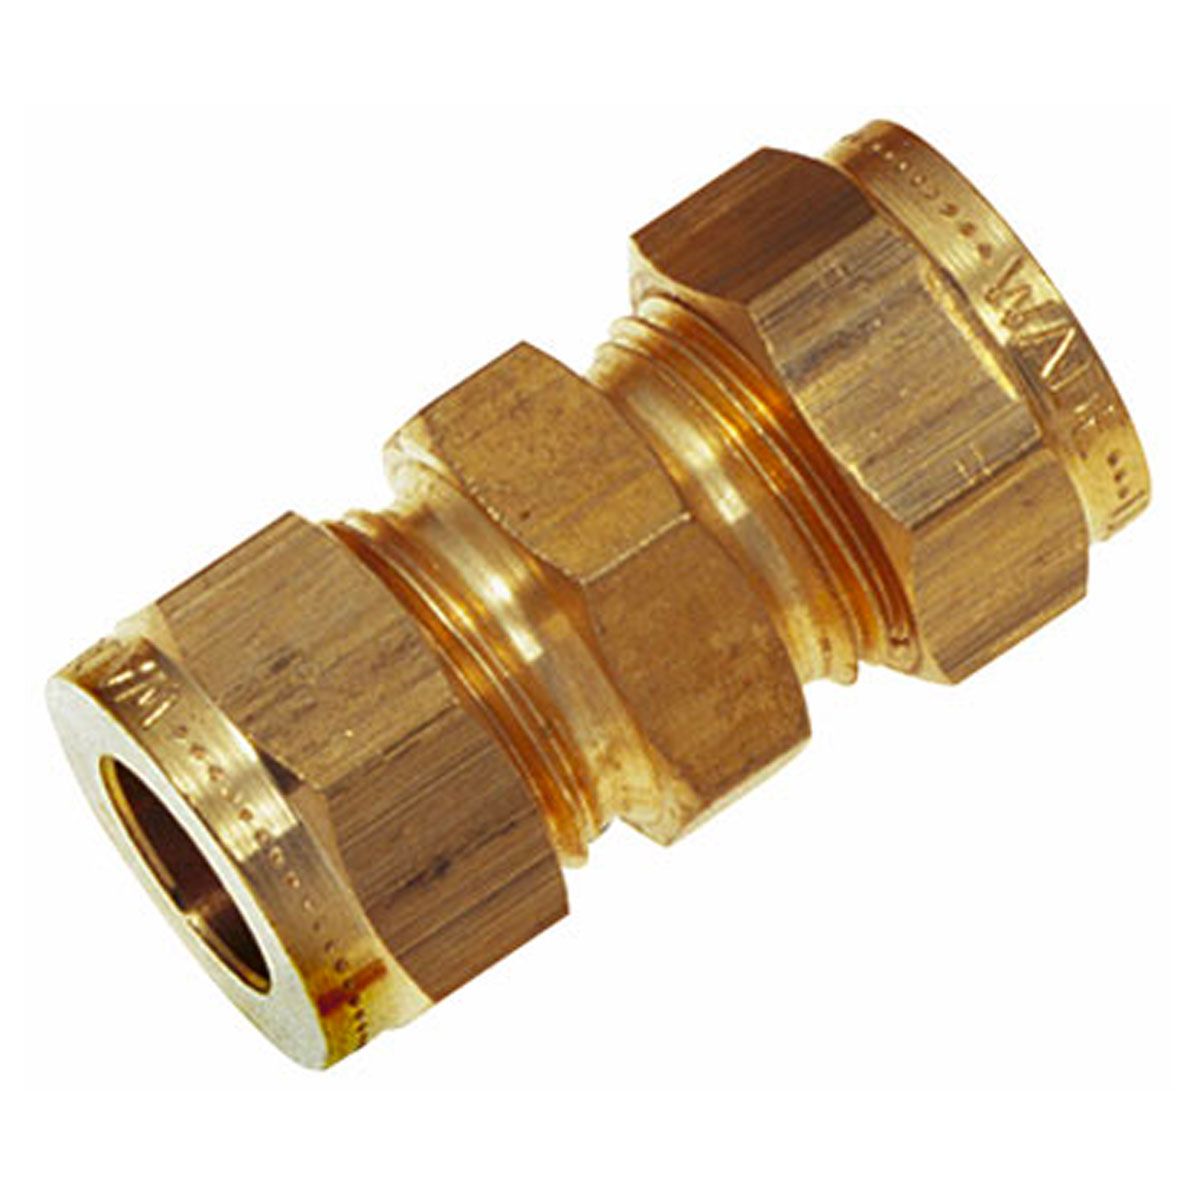 Wade Brass Imperial Stud Compression Fittings with Female Parallel BSP Threads 